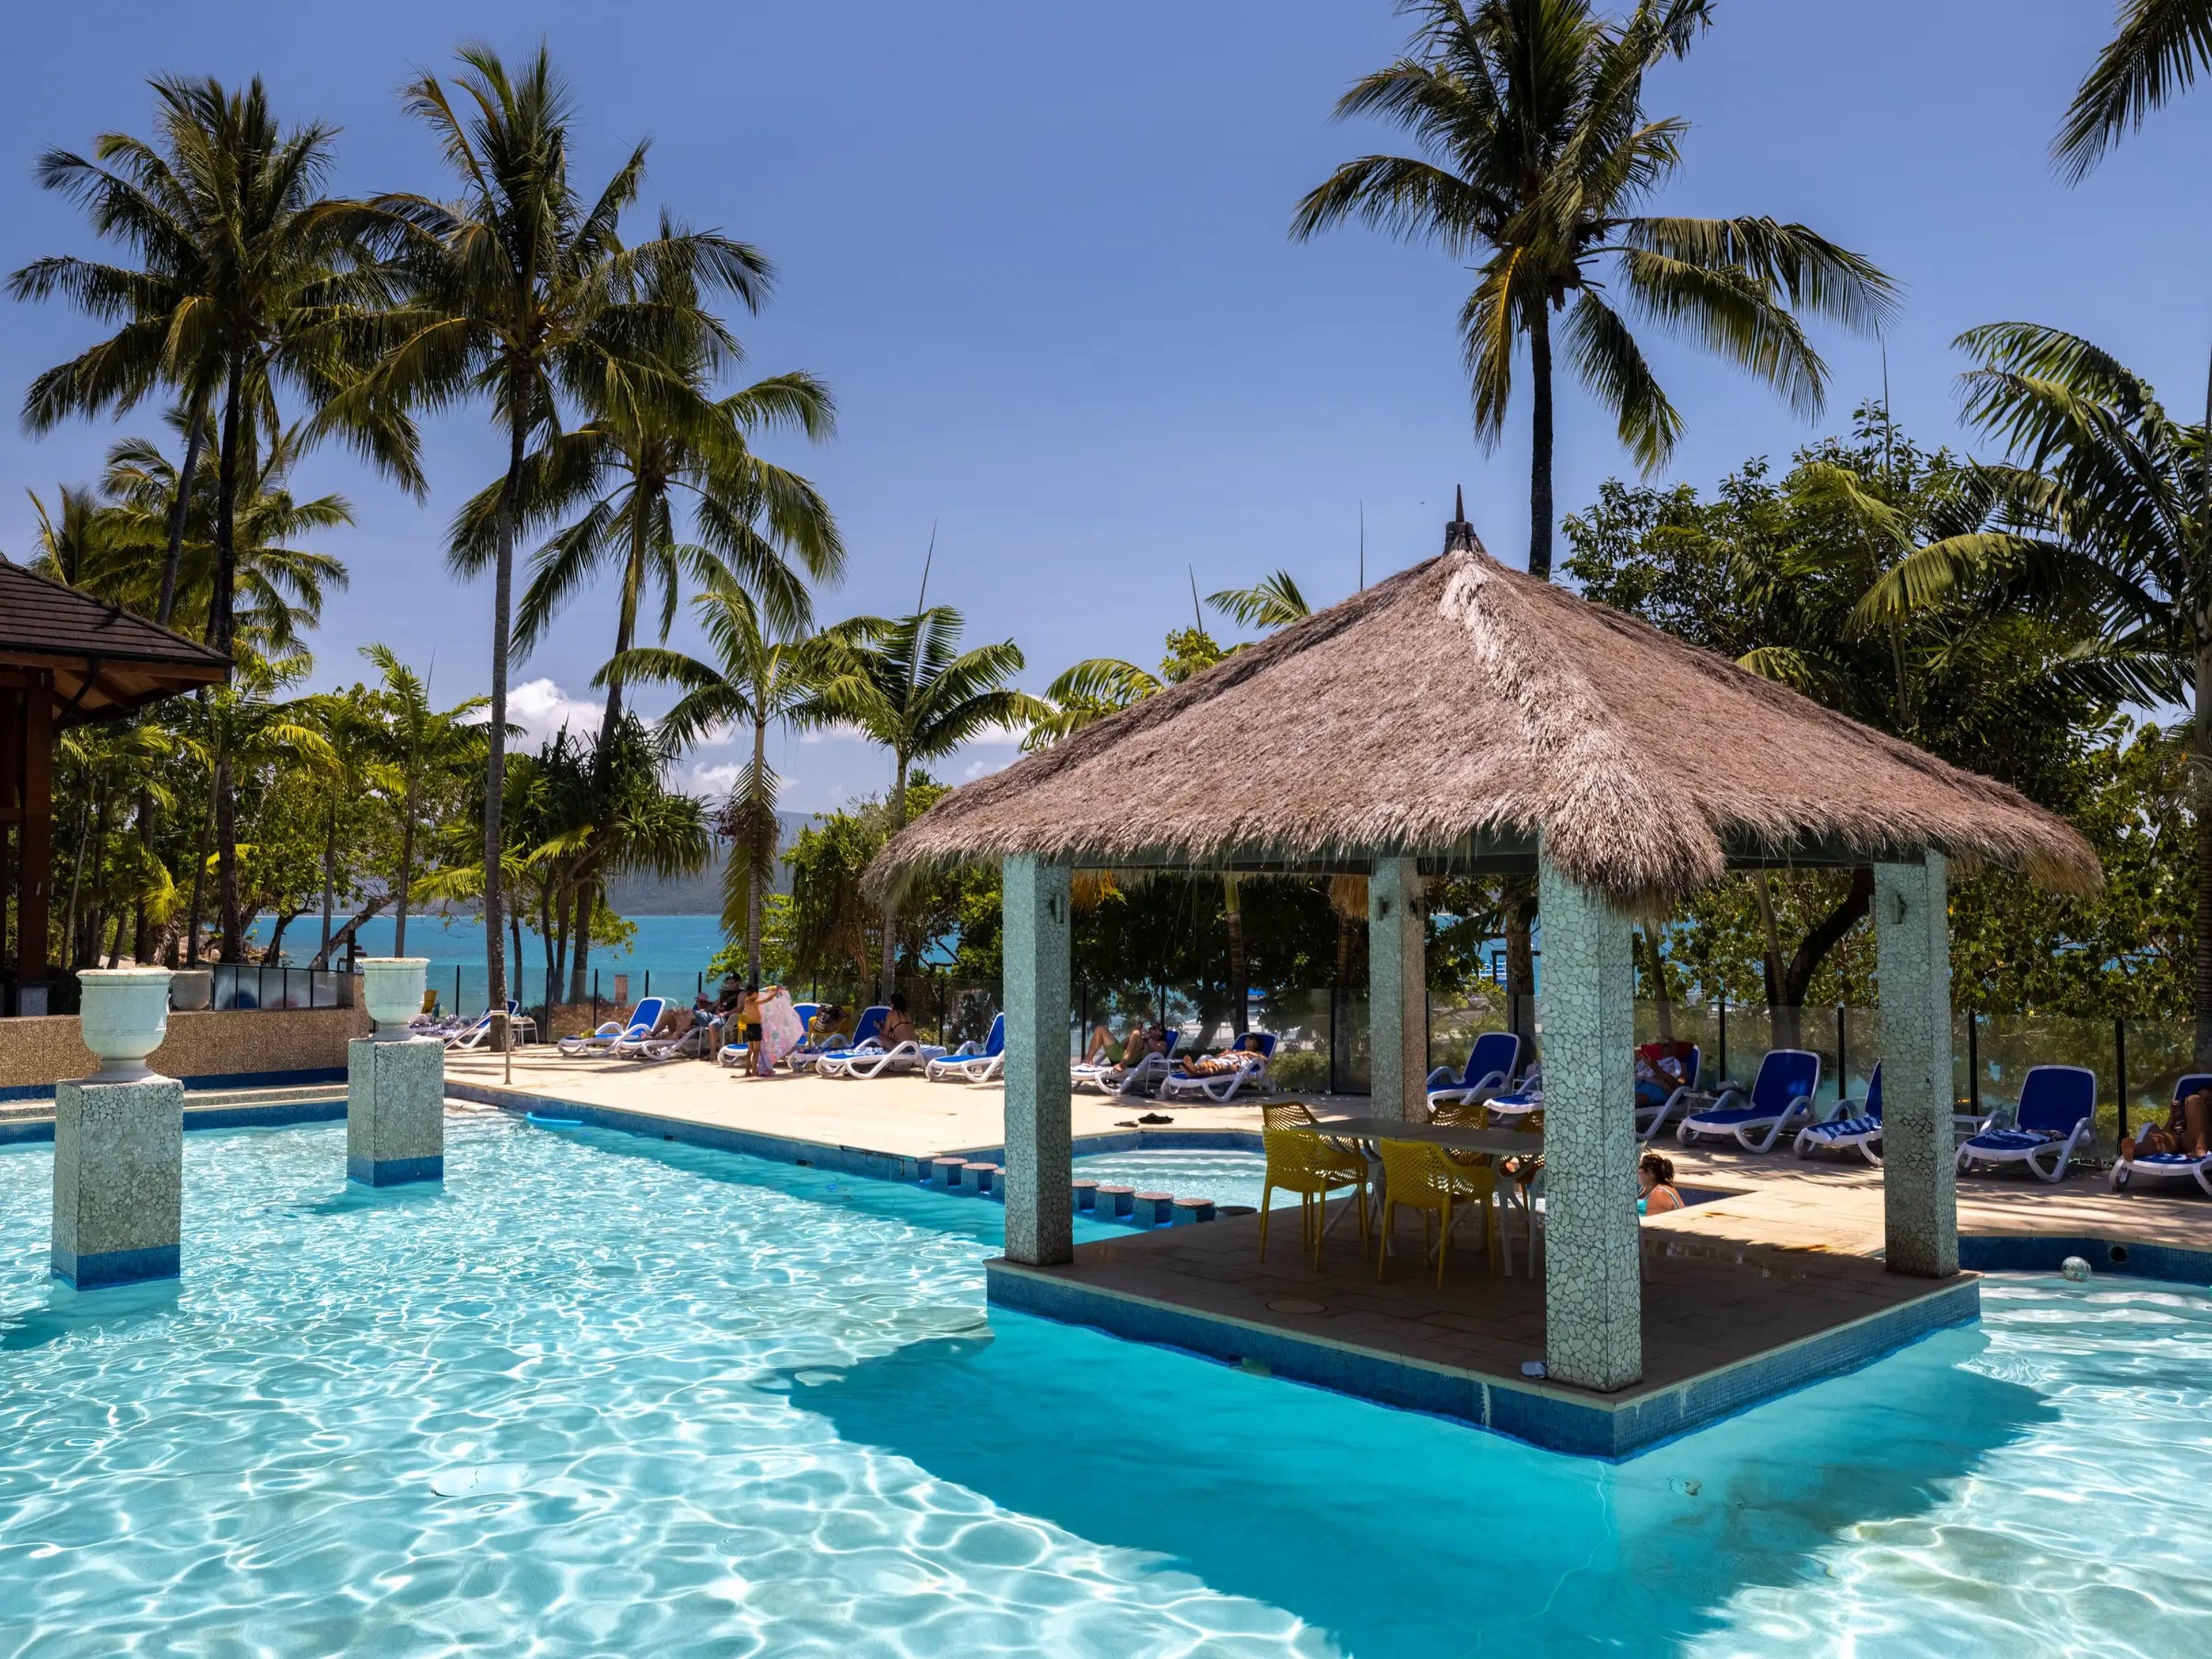 A tropical pool surrounded by palm trees. In the pool is a hut with a platform that houses a table and chairs.